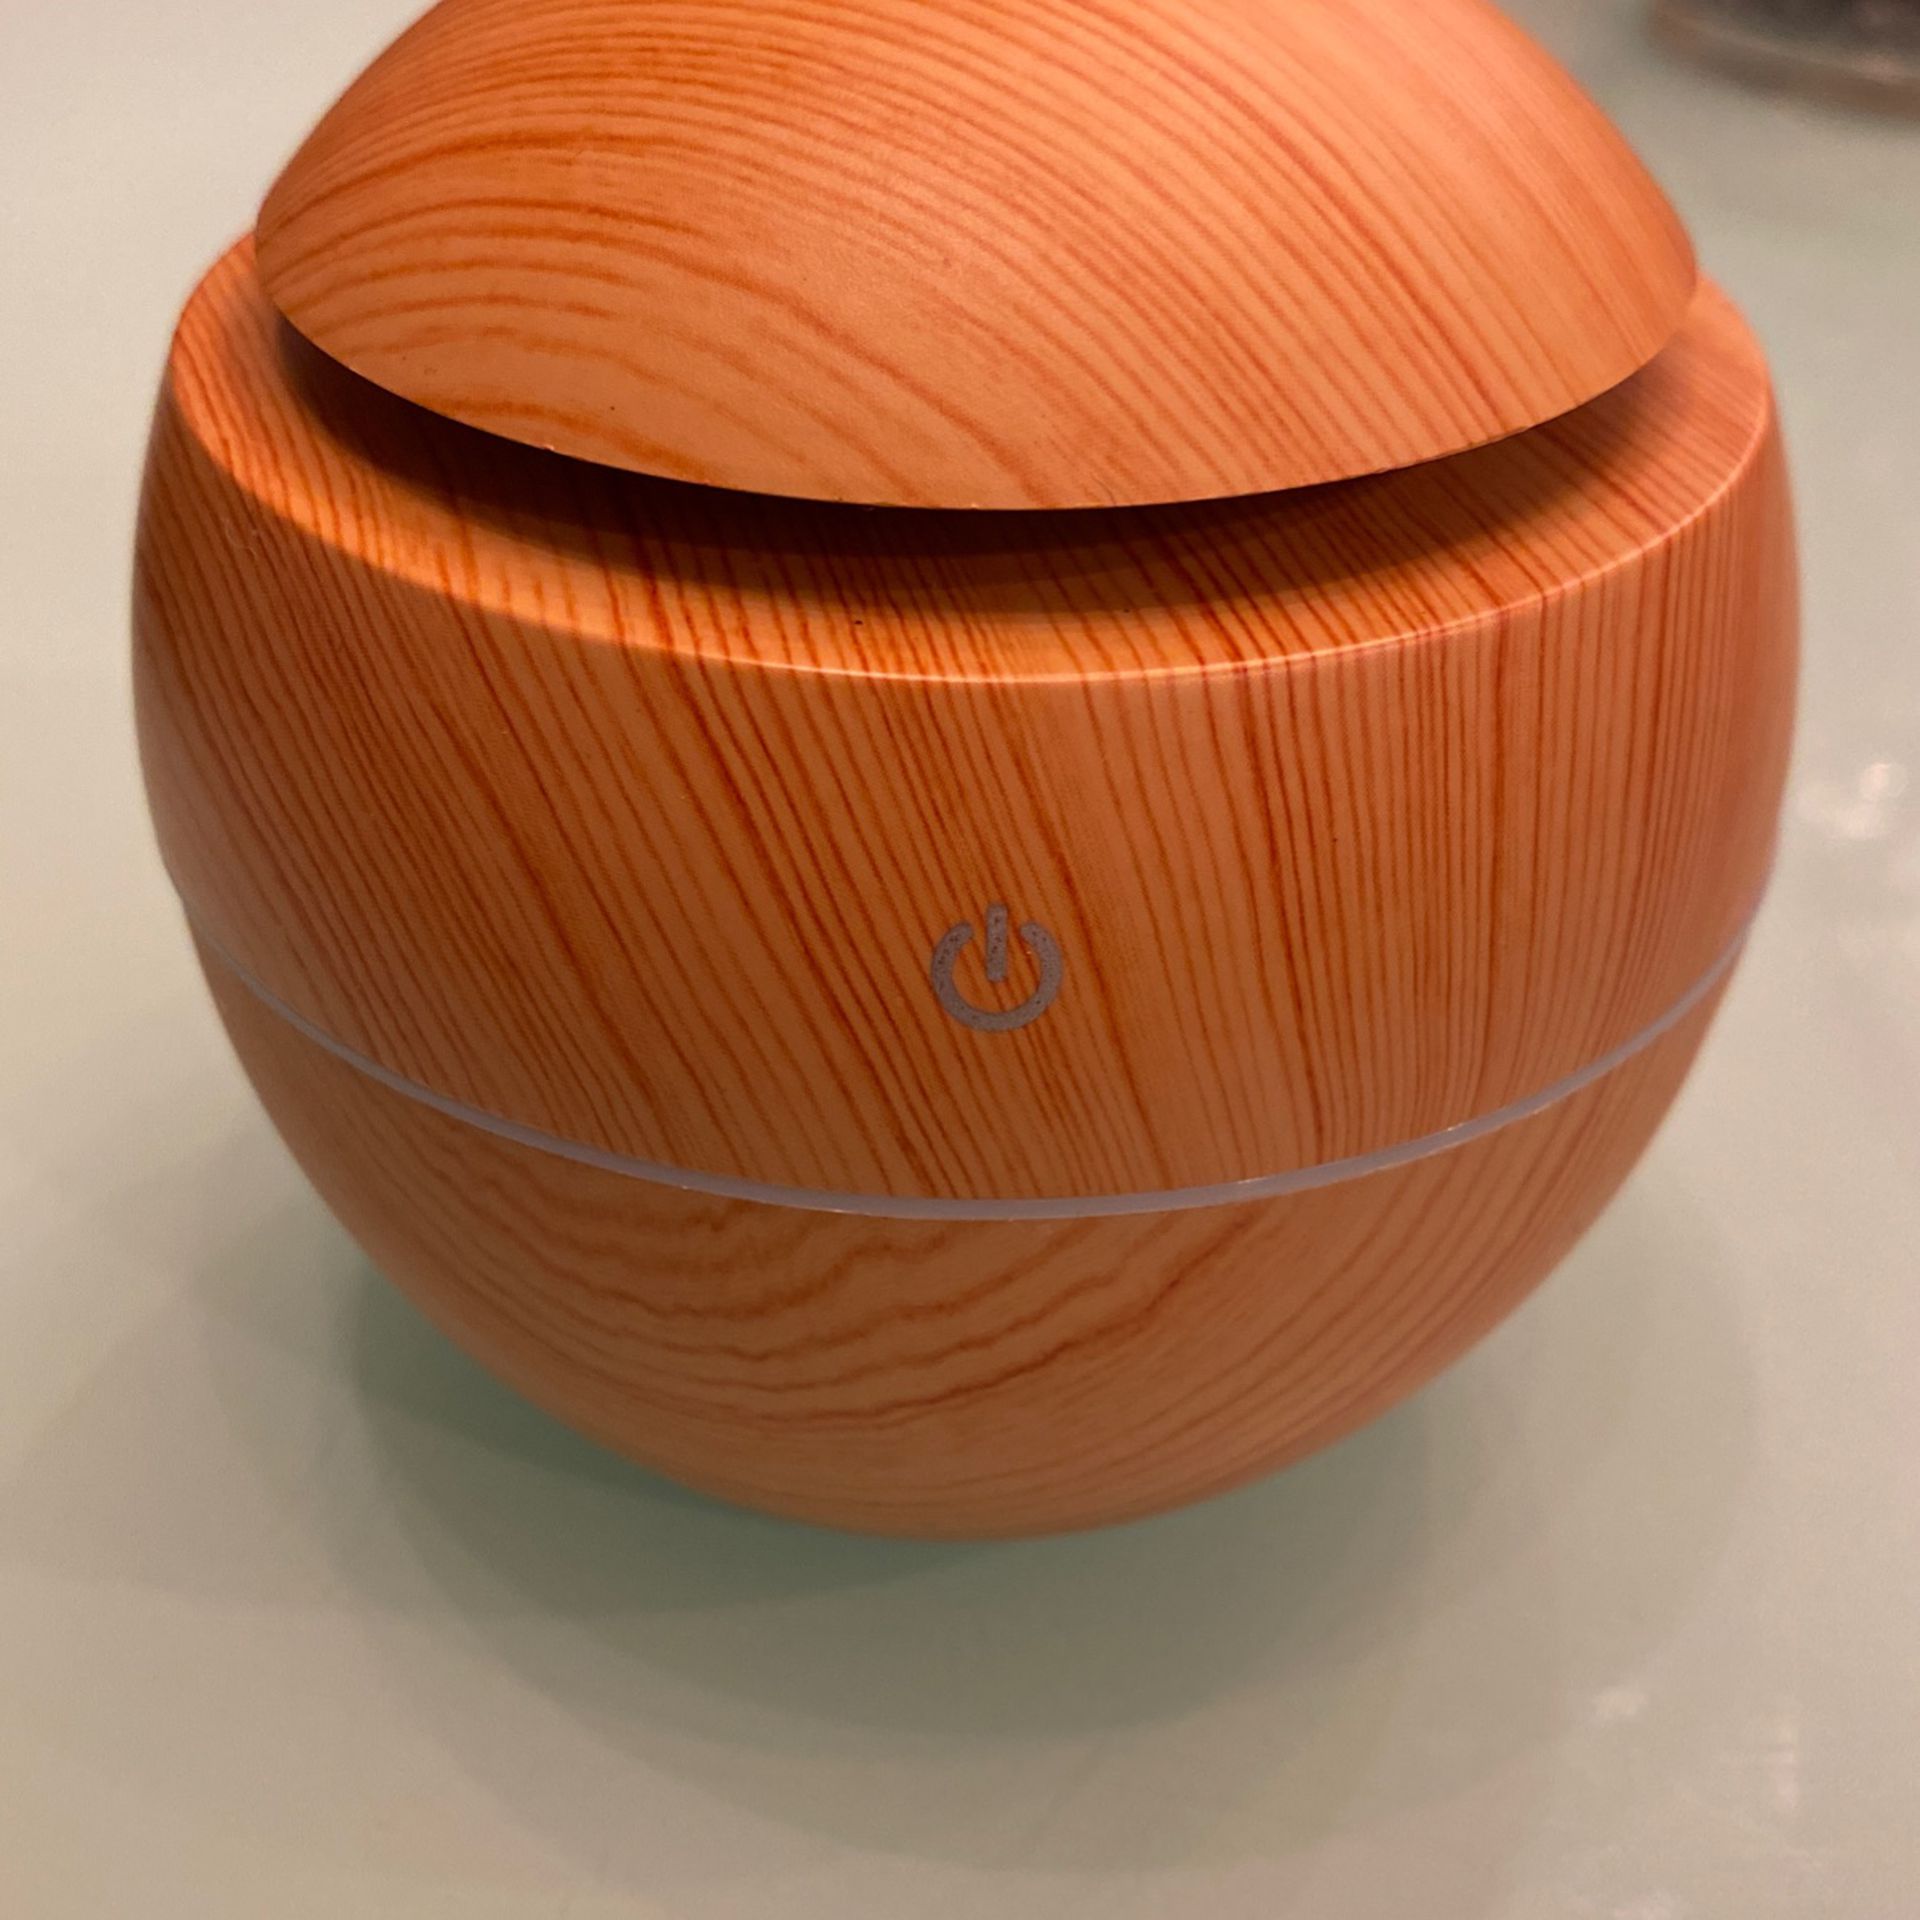 Mini Atomization Humidifier / Wood / Multicolor Lights / 15 $ Each One